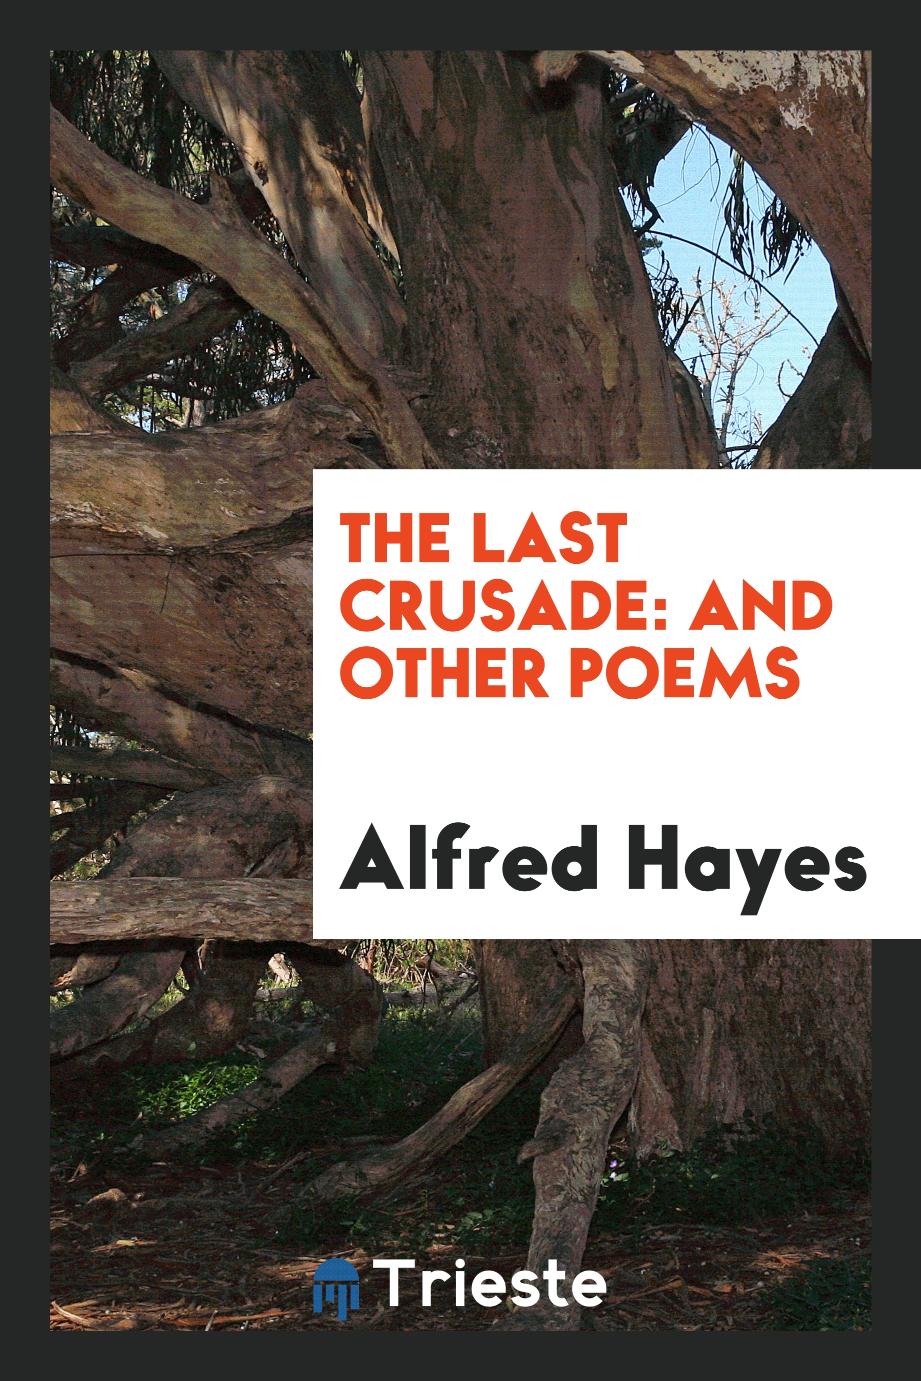 The Last Crusade: And Other Poems